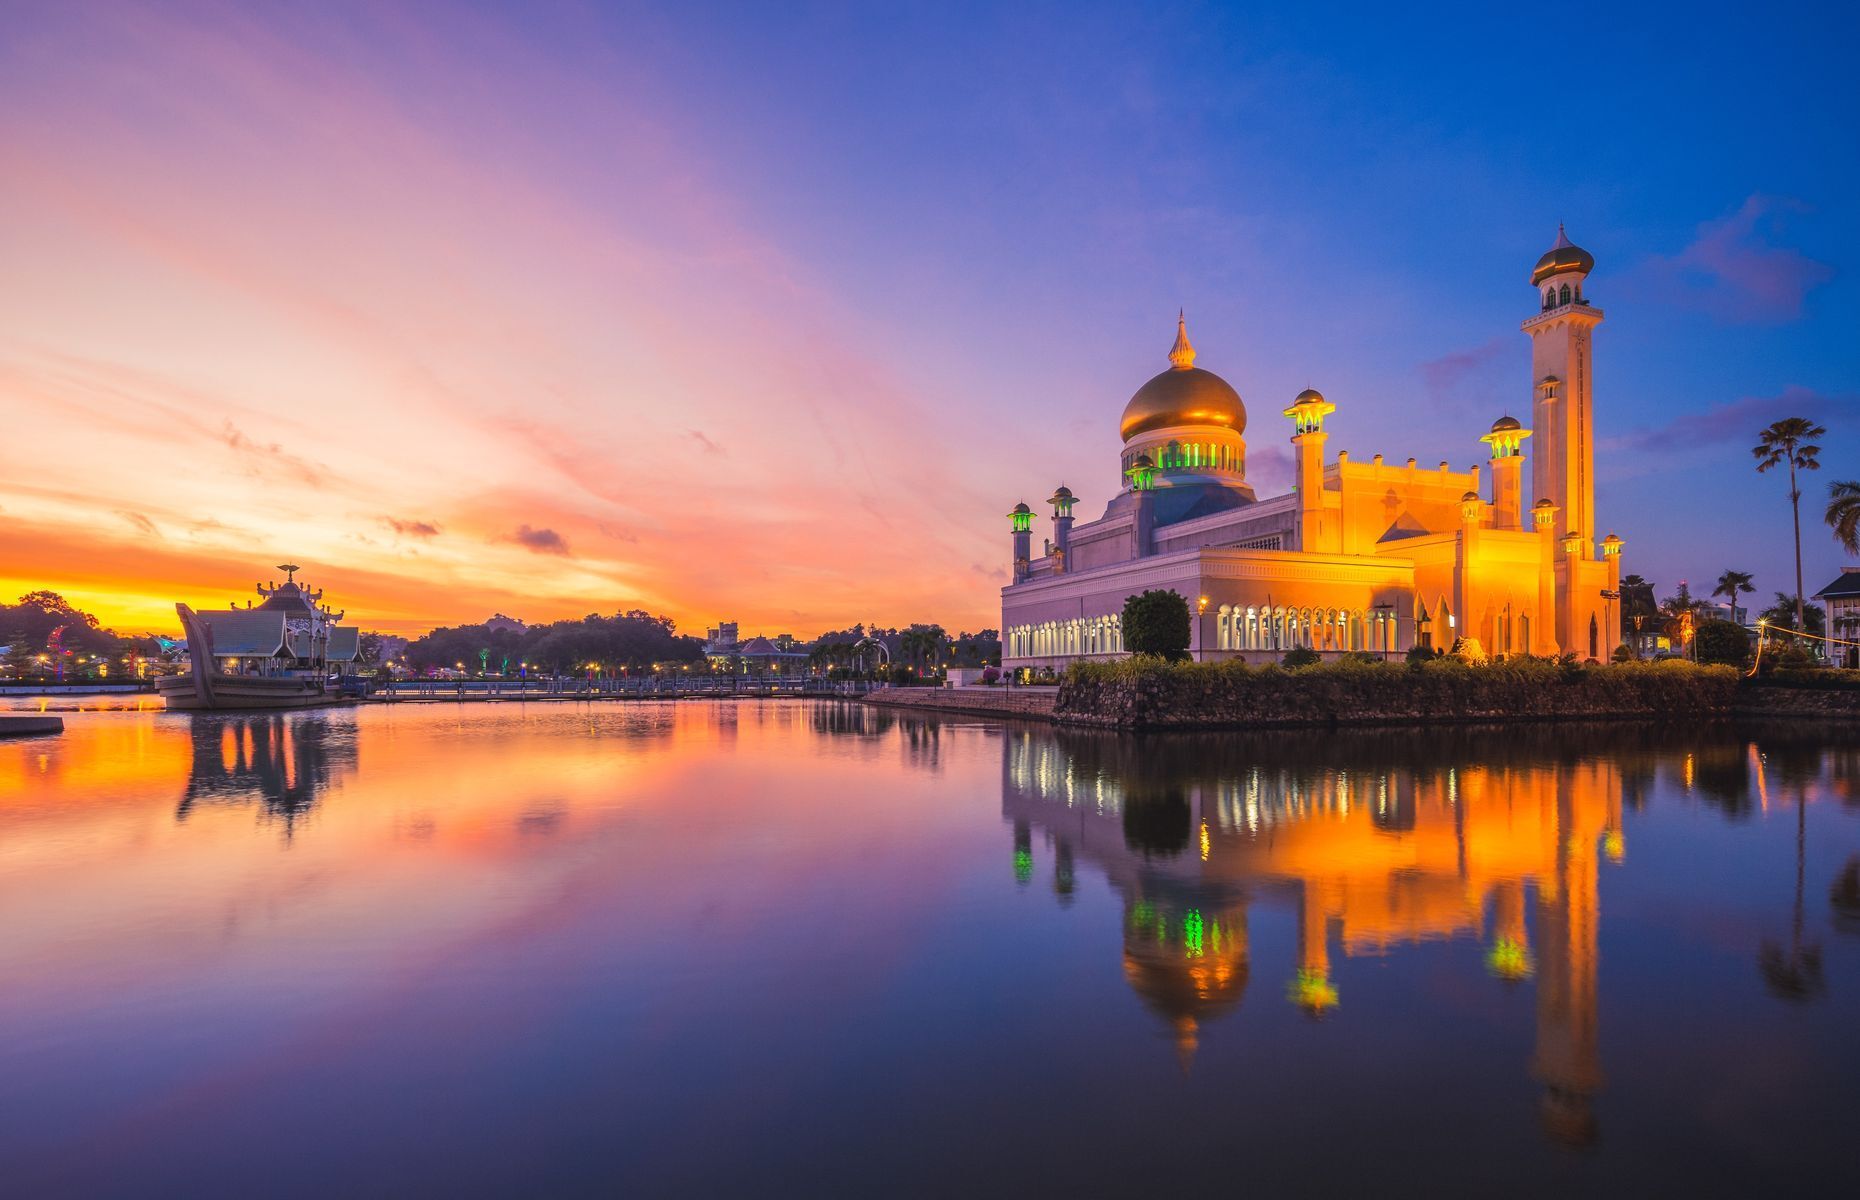 <p>A true work of architectural art, the <a href="https://www.visitsoutheastasia.travel/top-sights/sultan-omar-ali-saifuddien-mosque/" class="atom_link atom_valid" rel="noreferrer noopener">Omar Ali Saifuddien Mosque</a> graces the heart of Brunei’s capital Bandar Seri Begawan. A symbol of elegance and the country’s Islamic faith, the mosque will leave you breathless with its magnificent golden dome, slender minarets, and opulent gardens. Non-Muslims can now go inside, but silence is mandatory, photos are forbidden, and shoes must be removed before entering.</p>